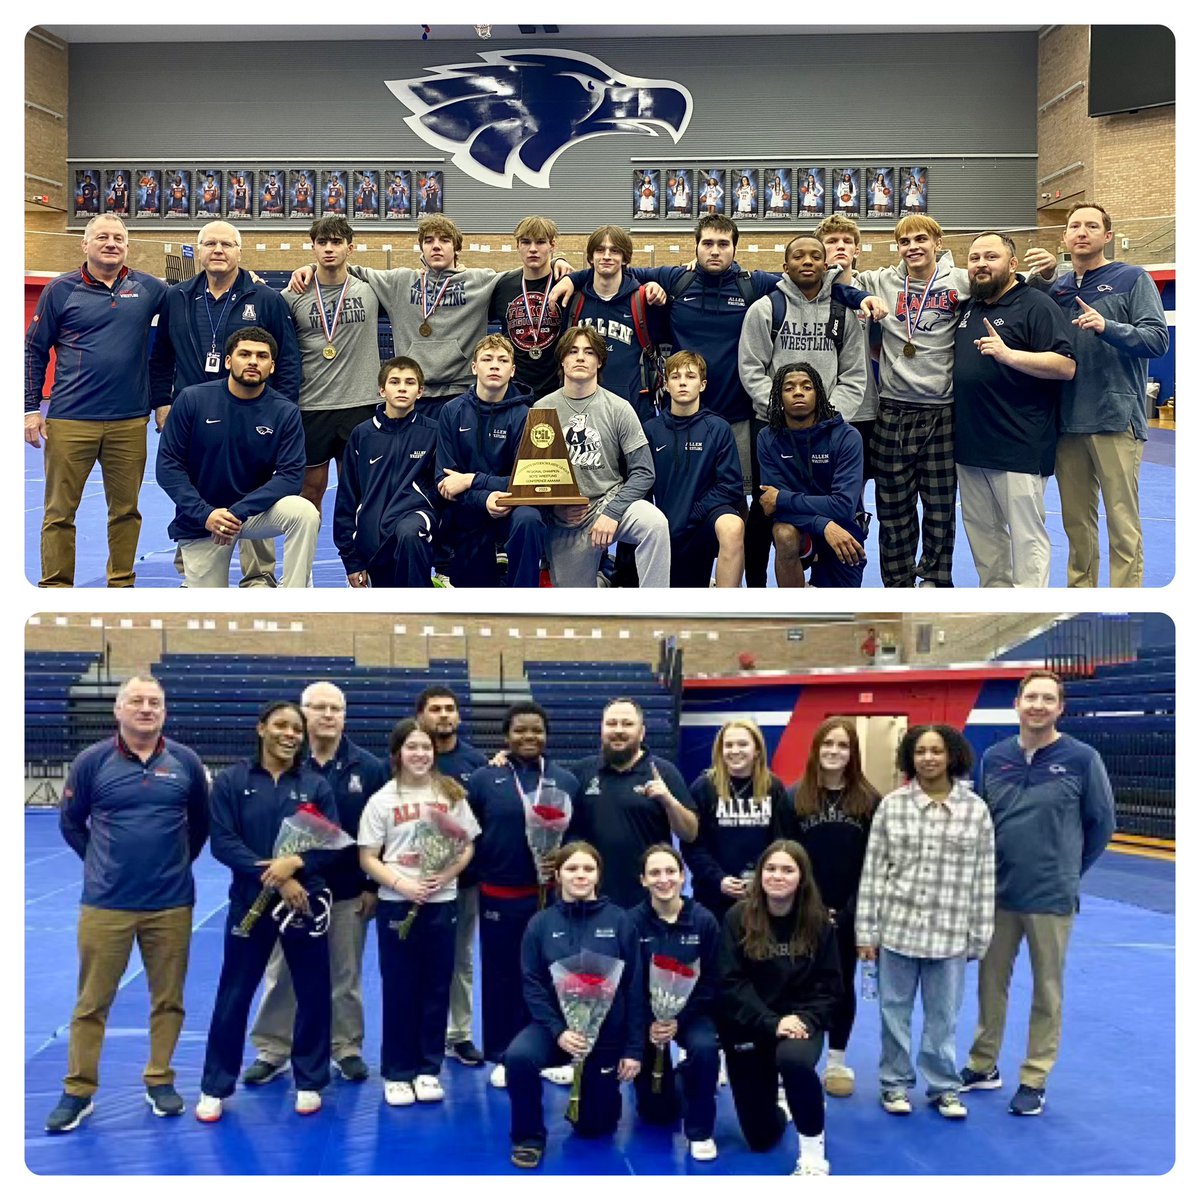 #AllenWrestling 2-6A Regionals
#AllenEagles qualify 13 boys and 5 girls for #UILstate with 4 boys and 3 girls #RegionalChampions 

Girls take 2nd as a team & Allen Boys win their 15th STRAIGHT Regional Championship with 305 points 60 points ahead of 2nd place #NoFinishLine